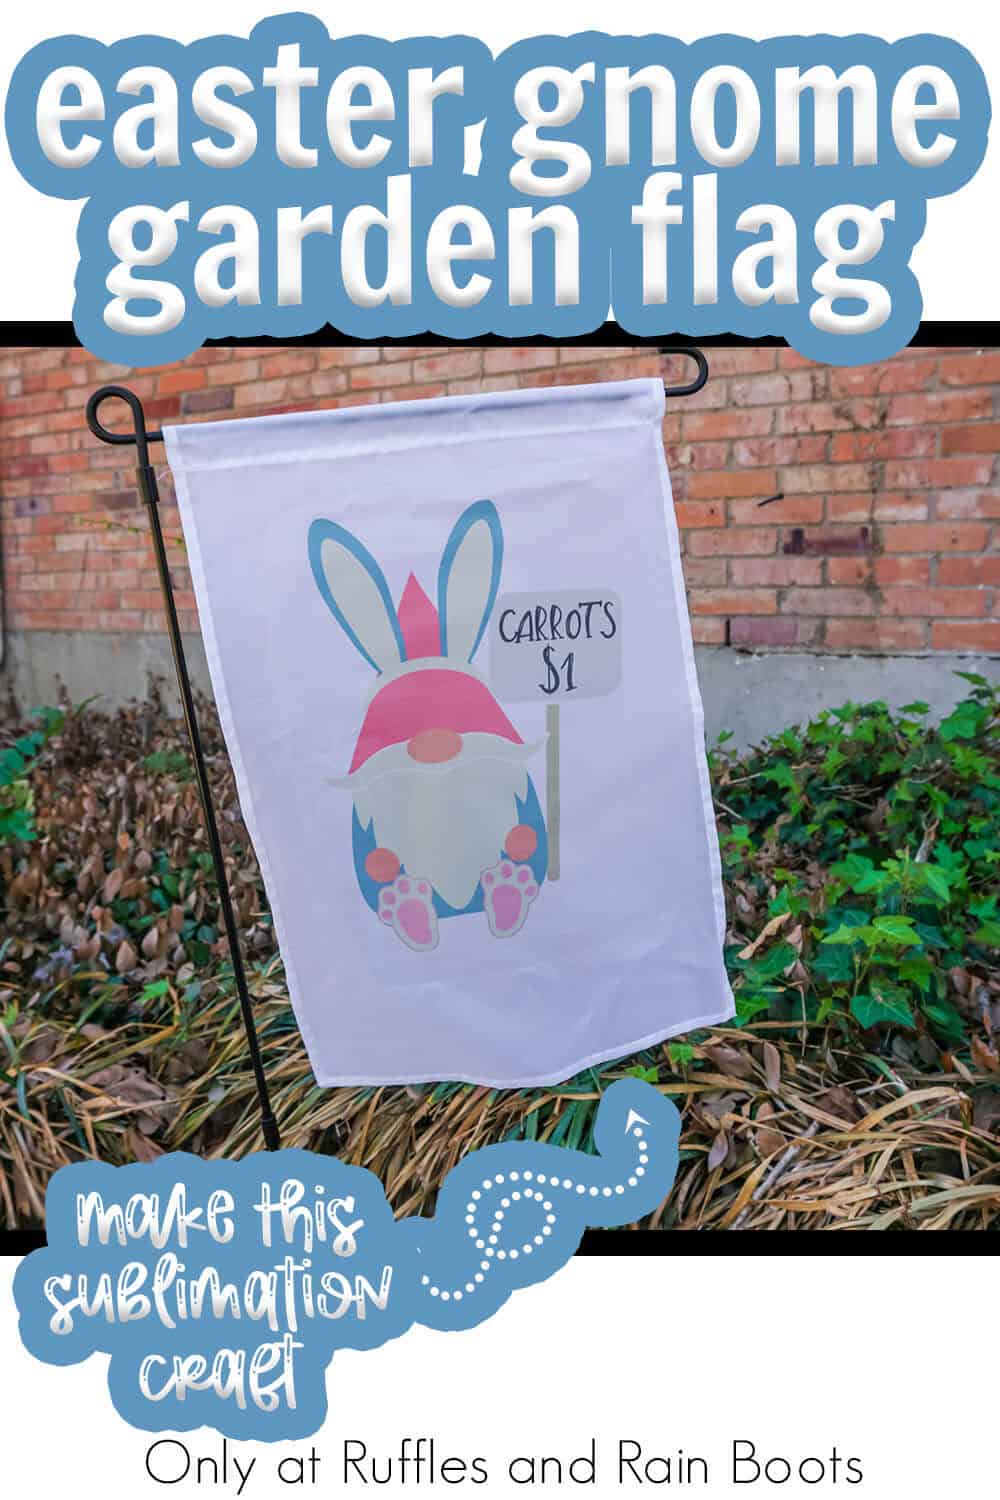 diy sublimation gnome garden flag for easter with text which reads easter gnome garden flag make this sublimation craft